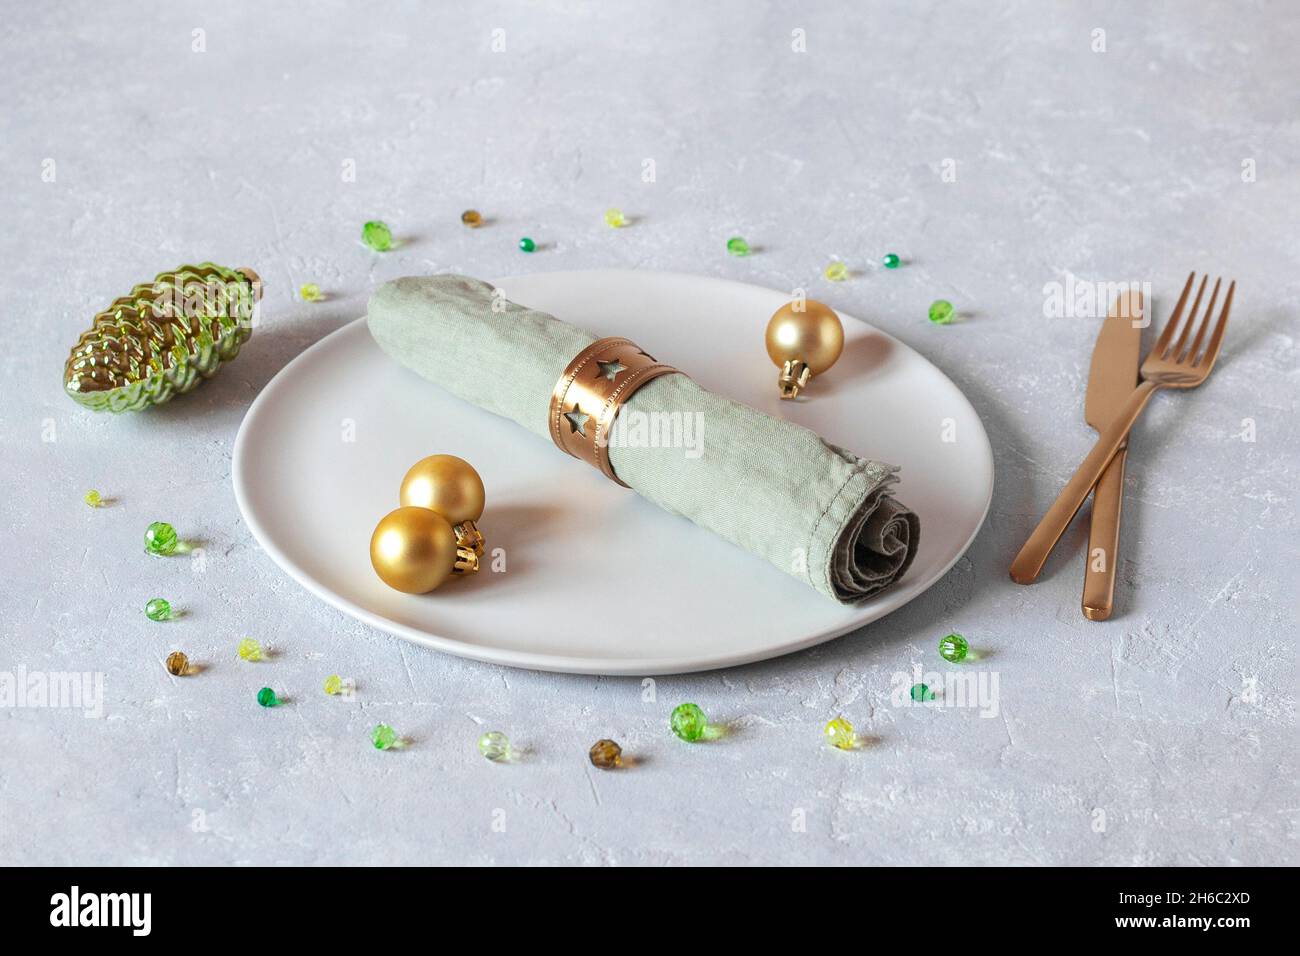 plate, napkin and cutlery decorated for Christmas dinner, golden and green colors, idea for Christmas card Stock Photo